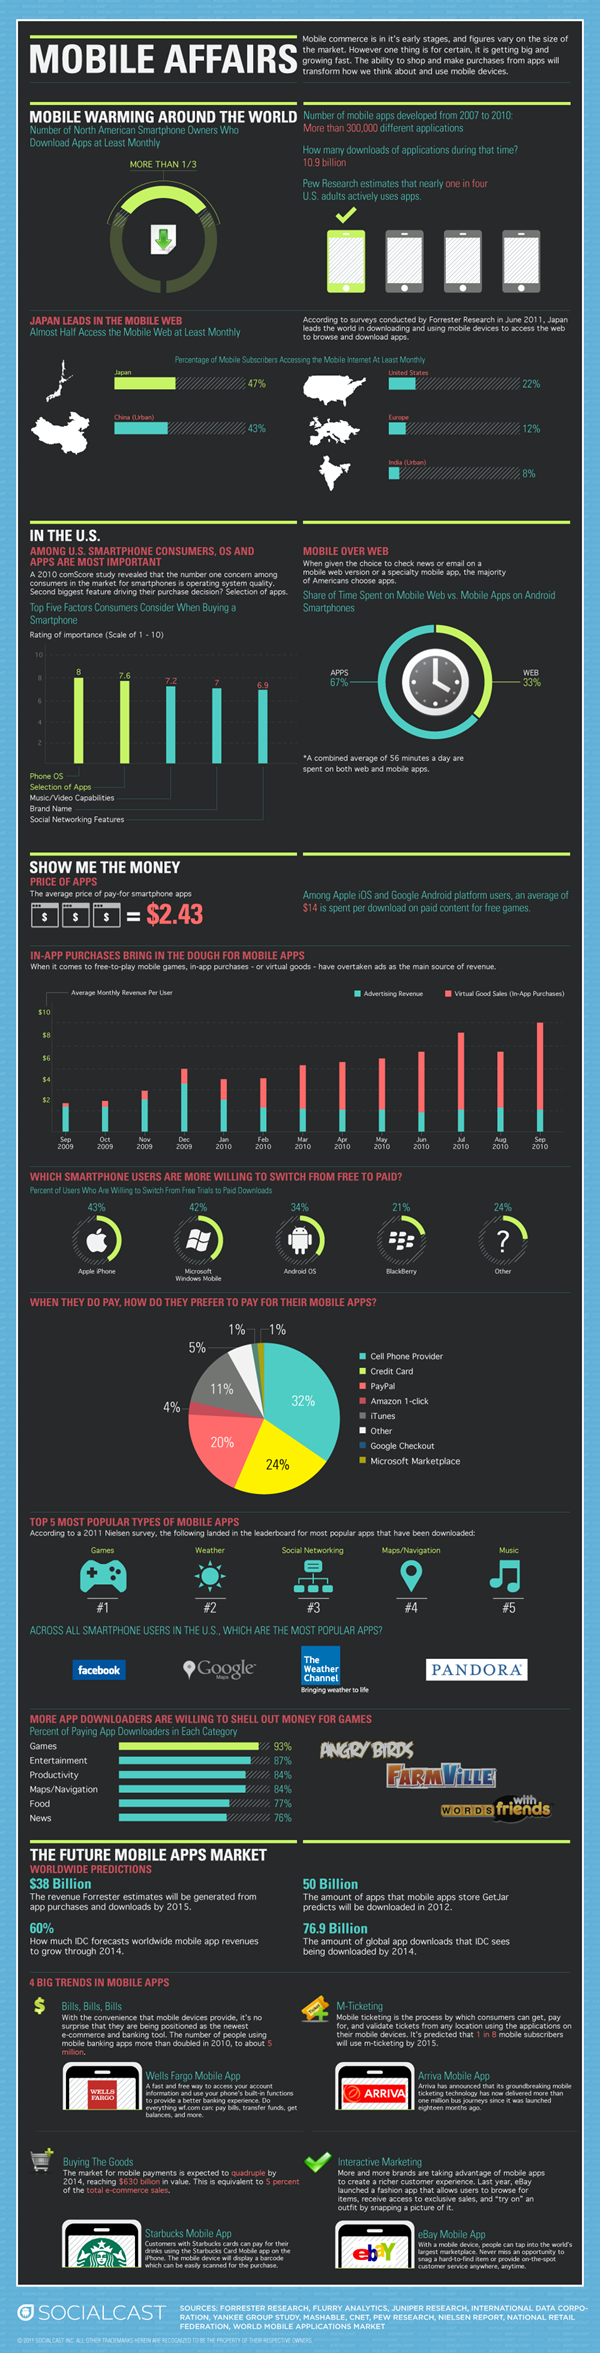 mobile commerce FINAL Mobile Apps Economy [Infographic]